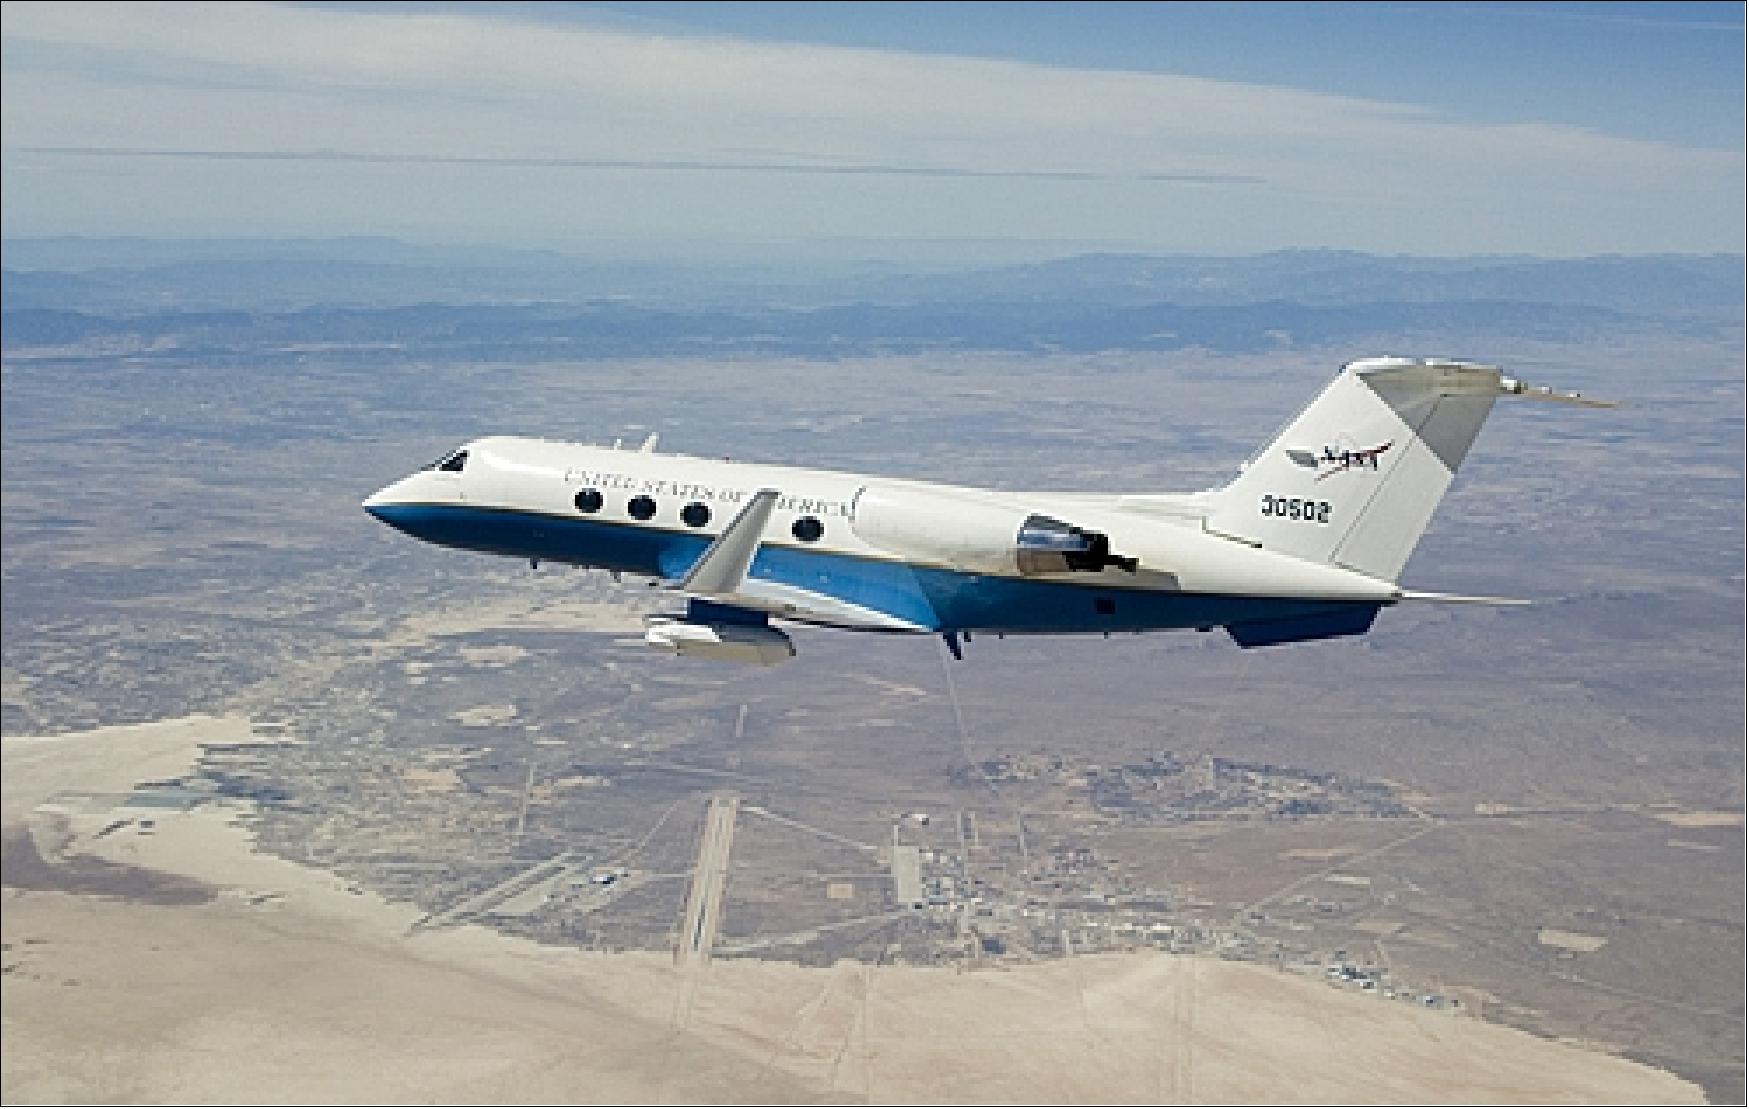 Figure 19: Modified NASA Gulfstream III in early flight tests with the UAVSAR pod attached to the underside of the aircraft (image credit: NASA/DFRC)